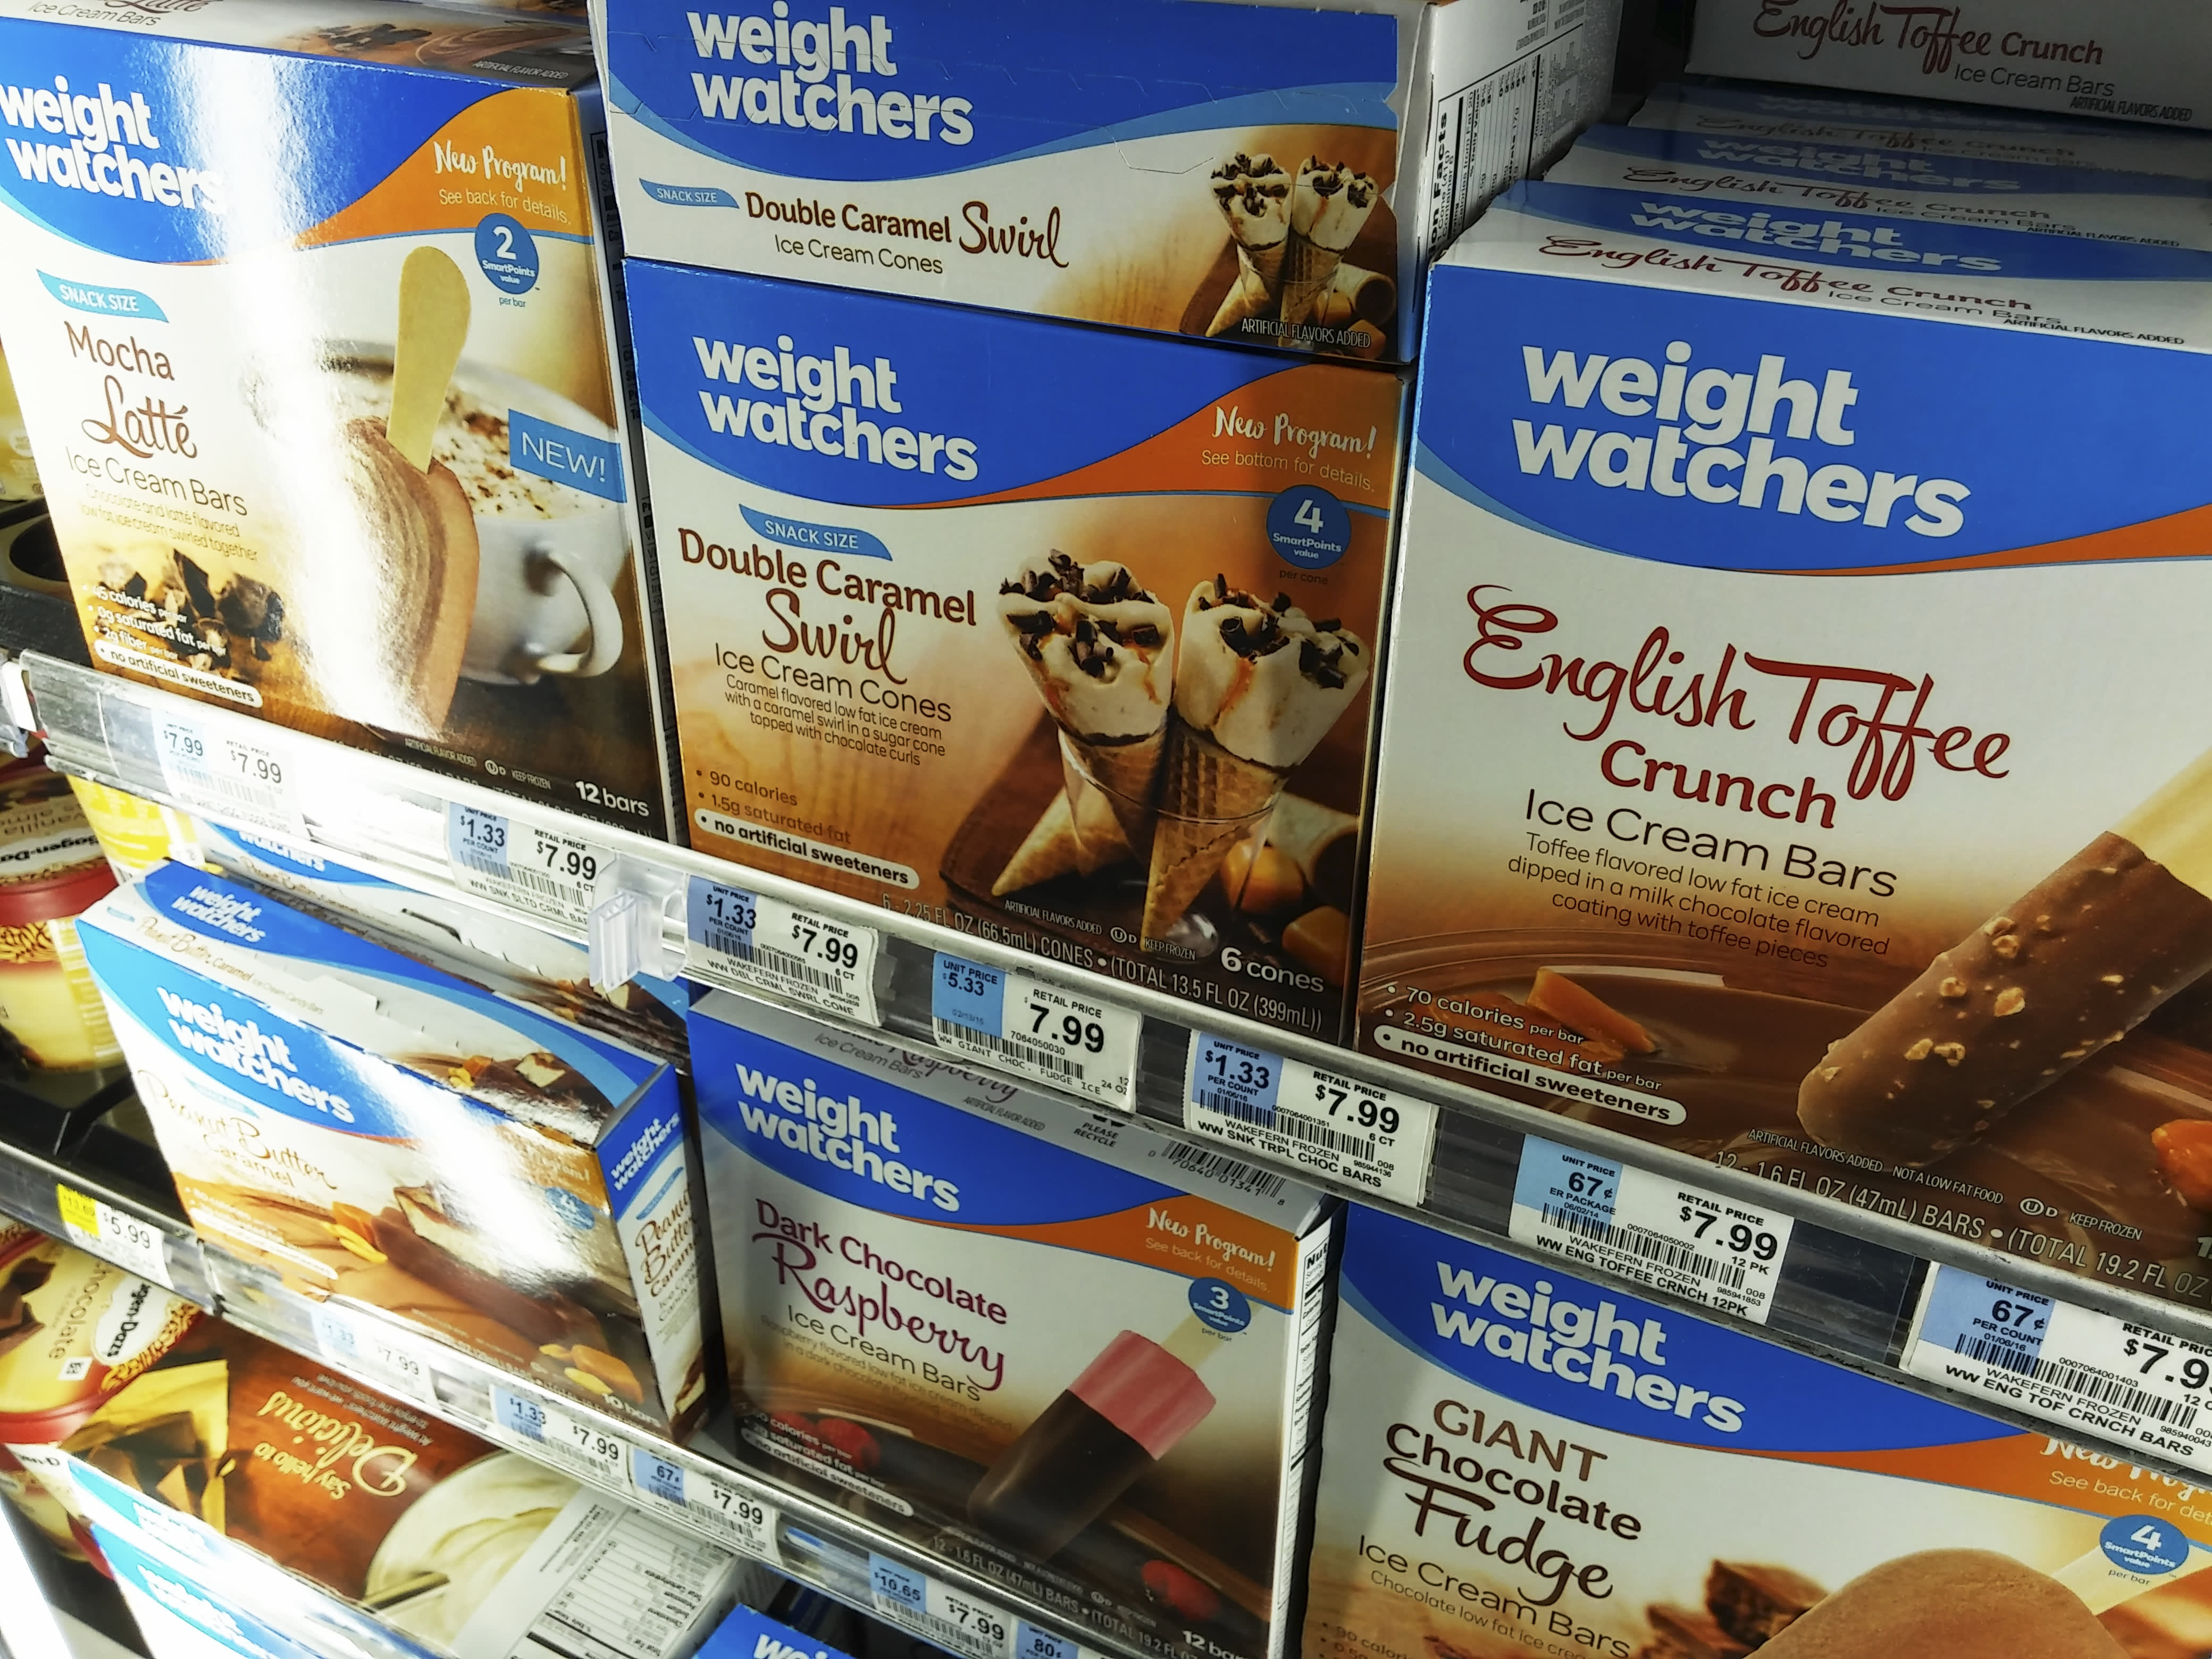 WeightWatchers stock surges after Sequence deal